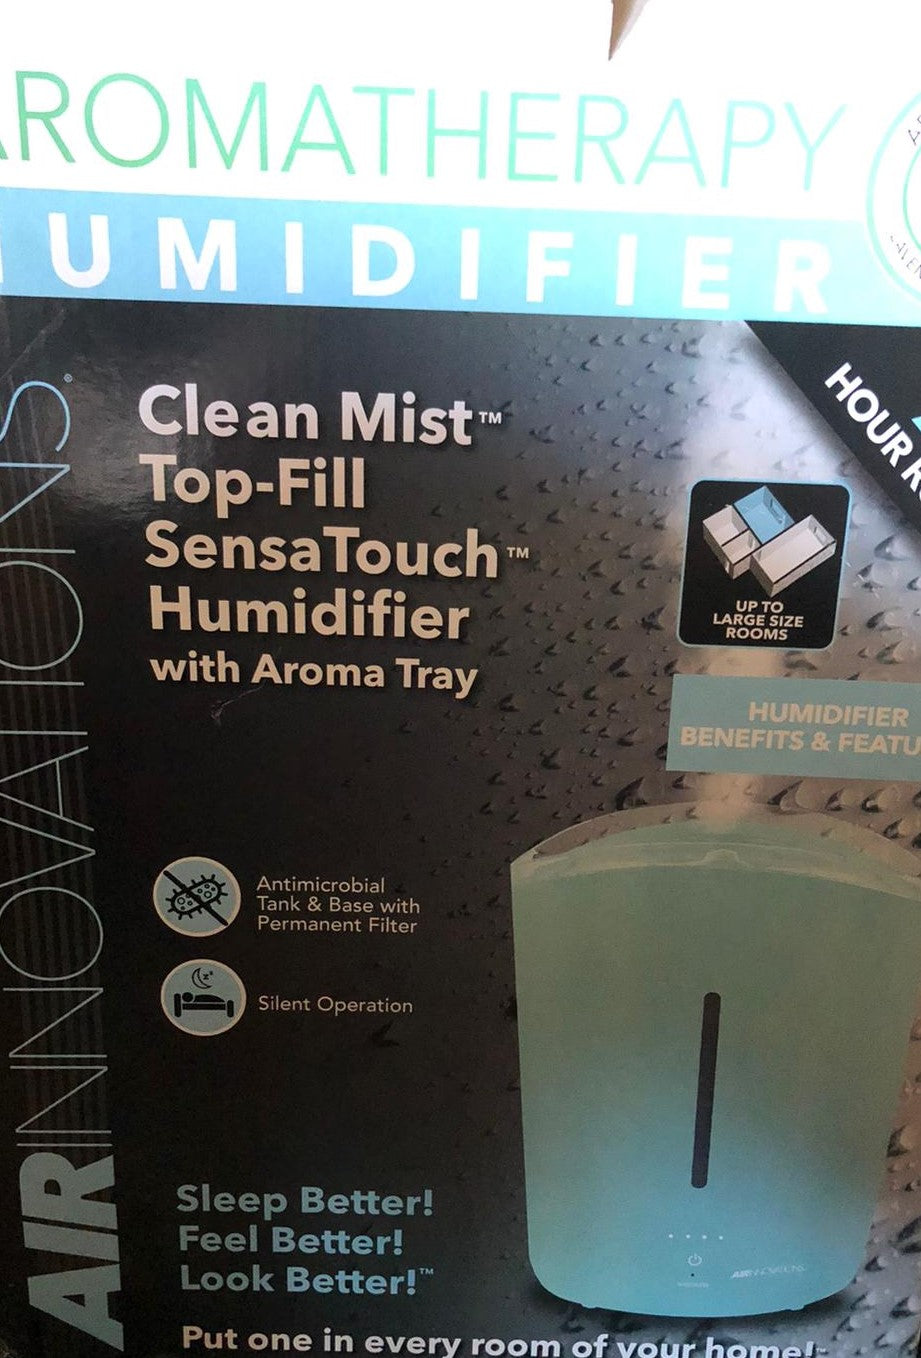 "As is" Air Innovations 1.3 Gal Clean Mist Top Fill SensaTouch Humidifier